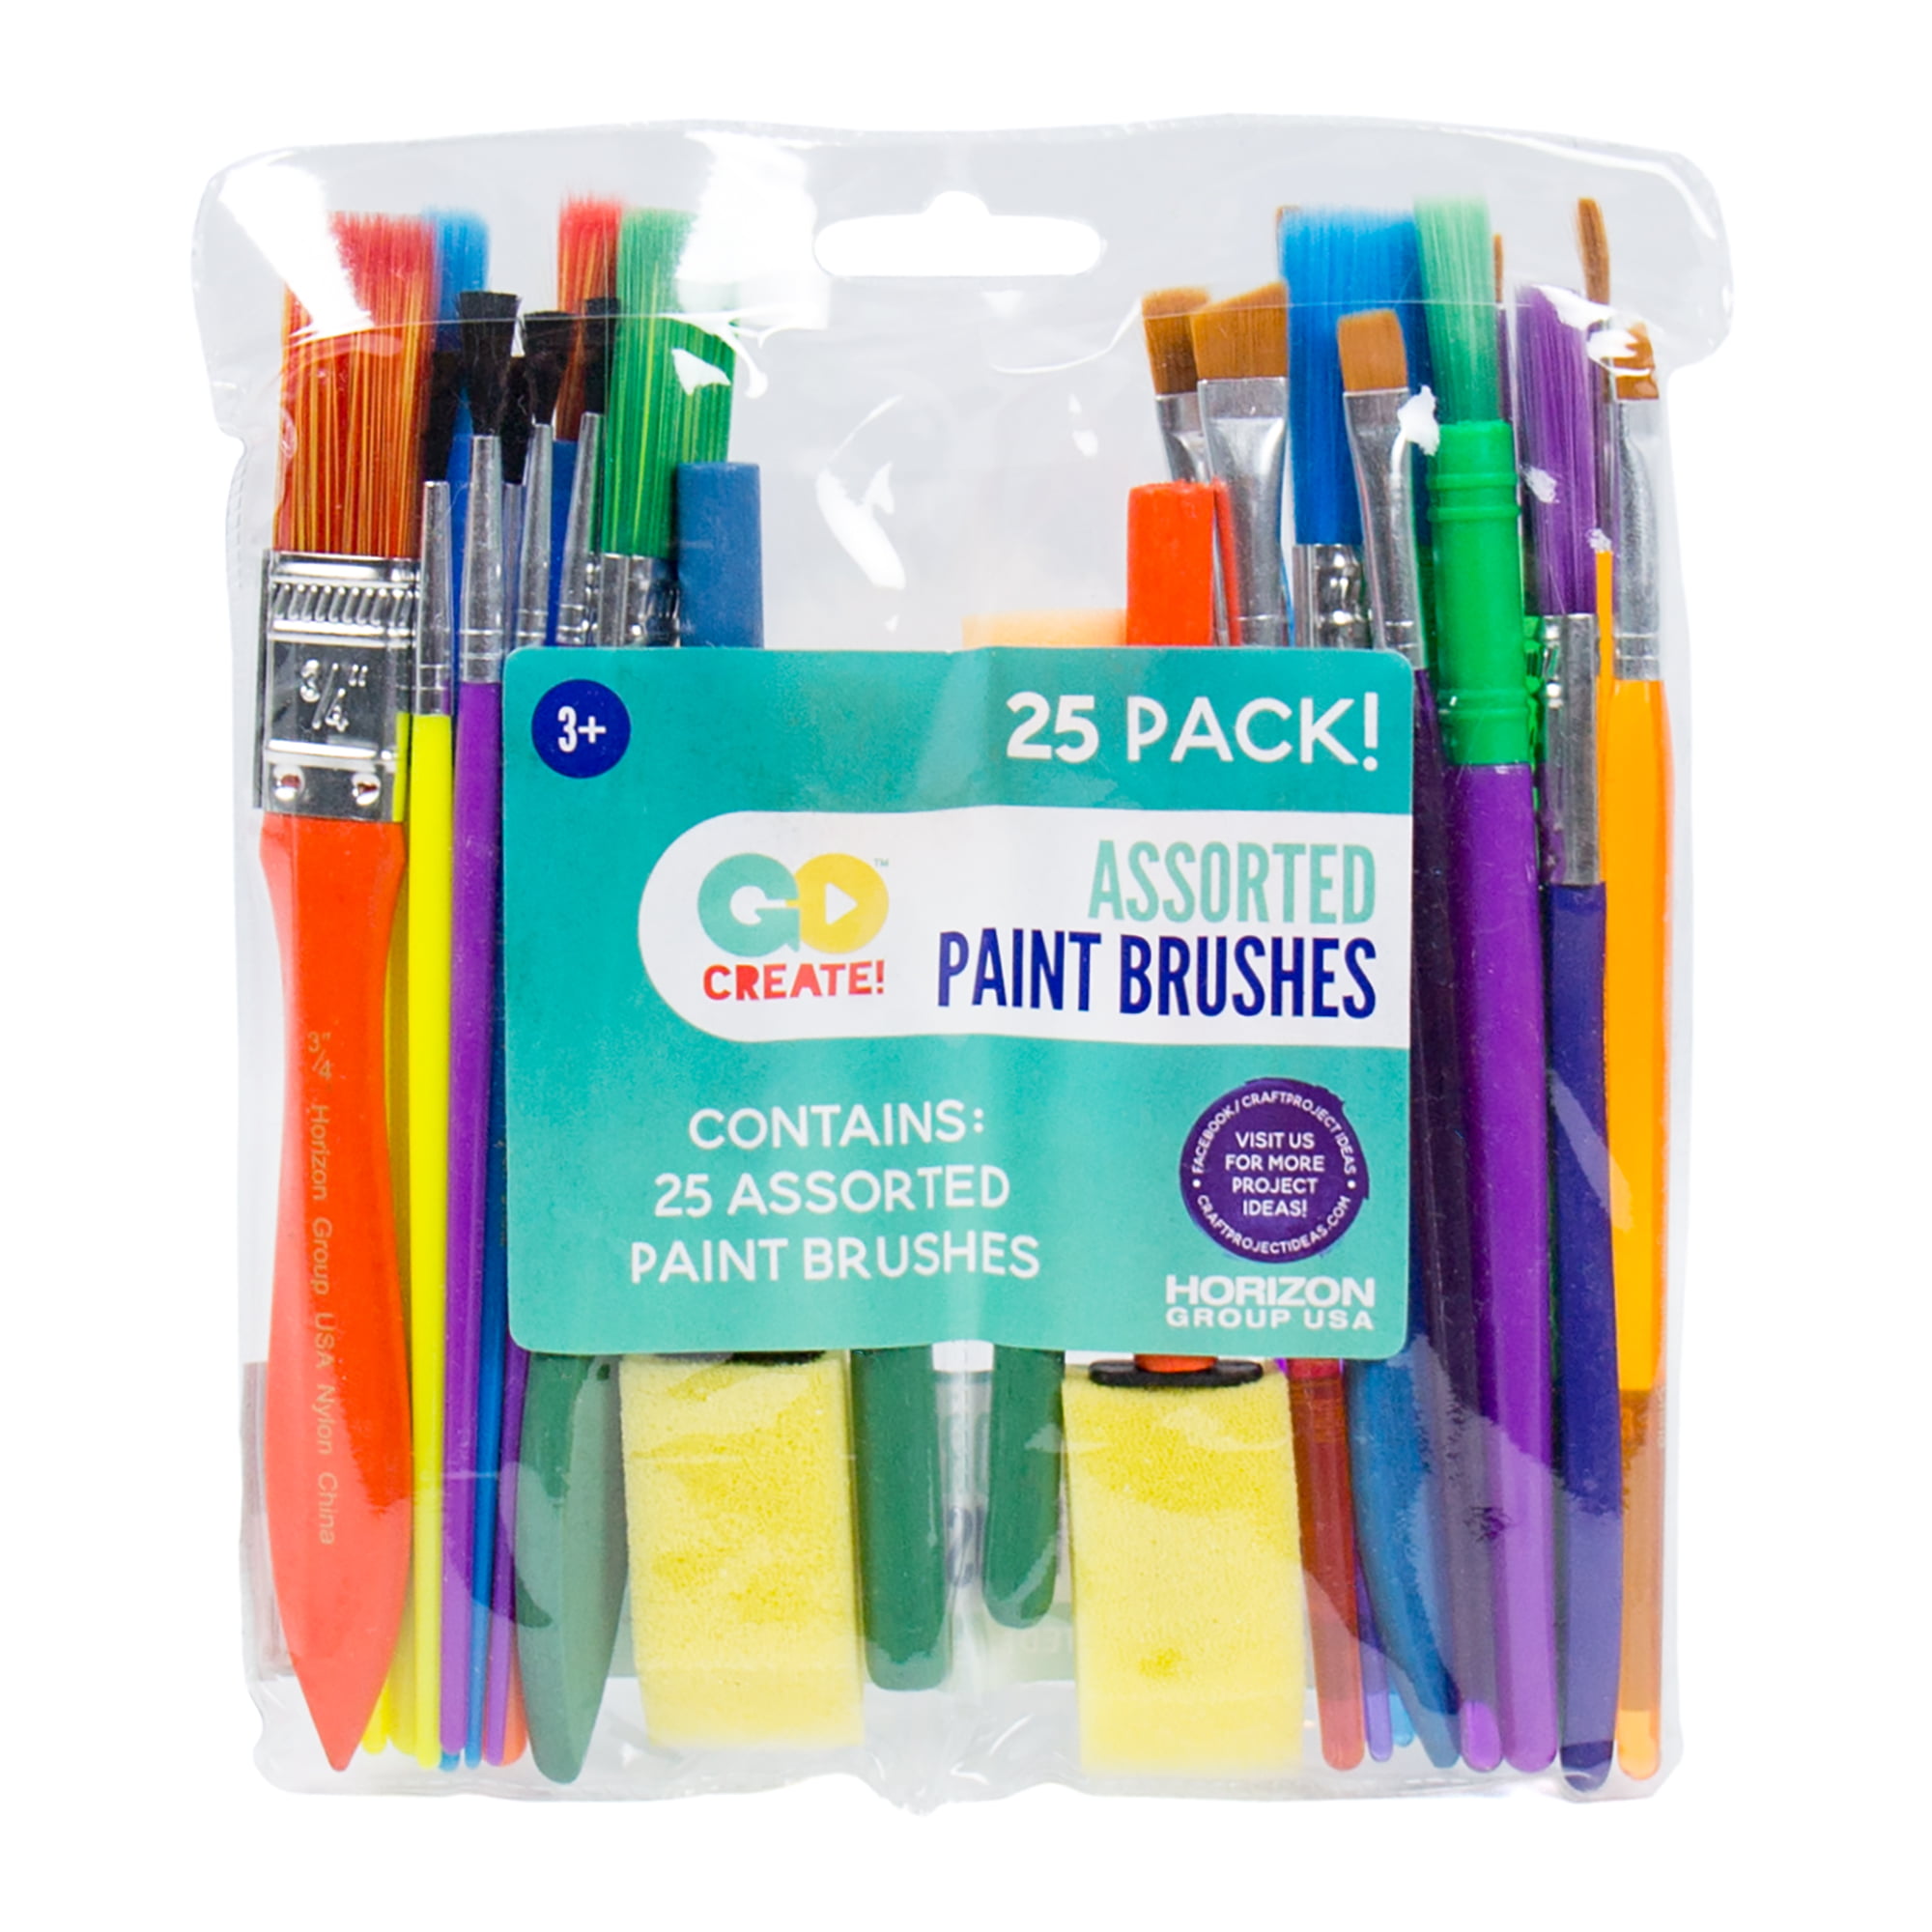 25 ASSORTED BRUSHES & SPONGES KIDS CRAFT PAINT BRUSHES 